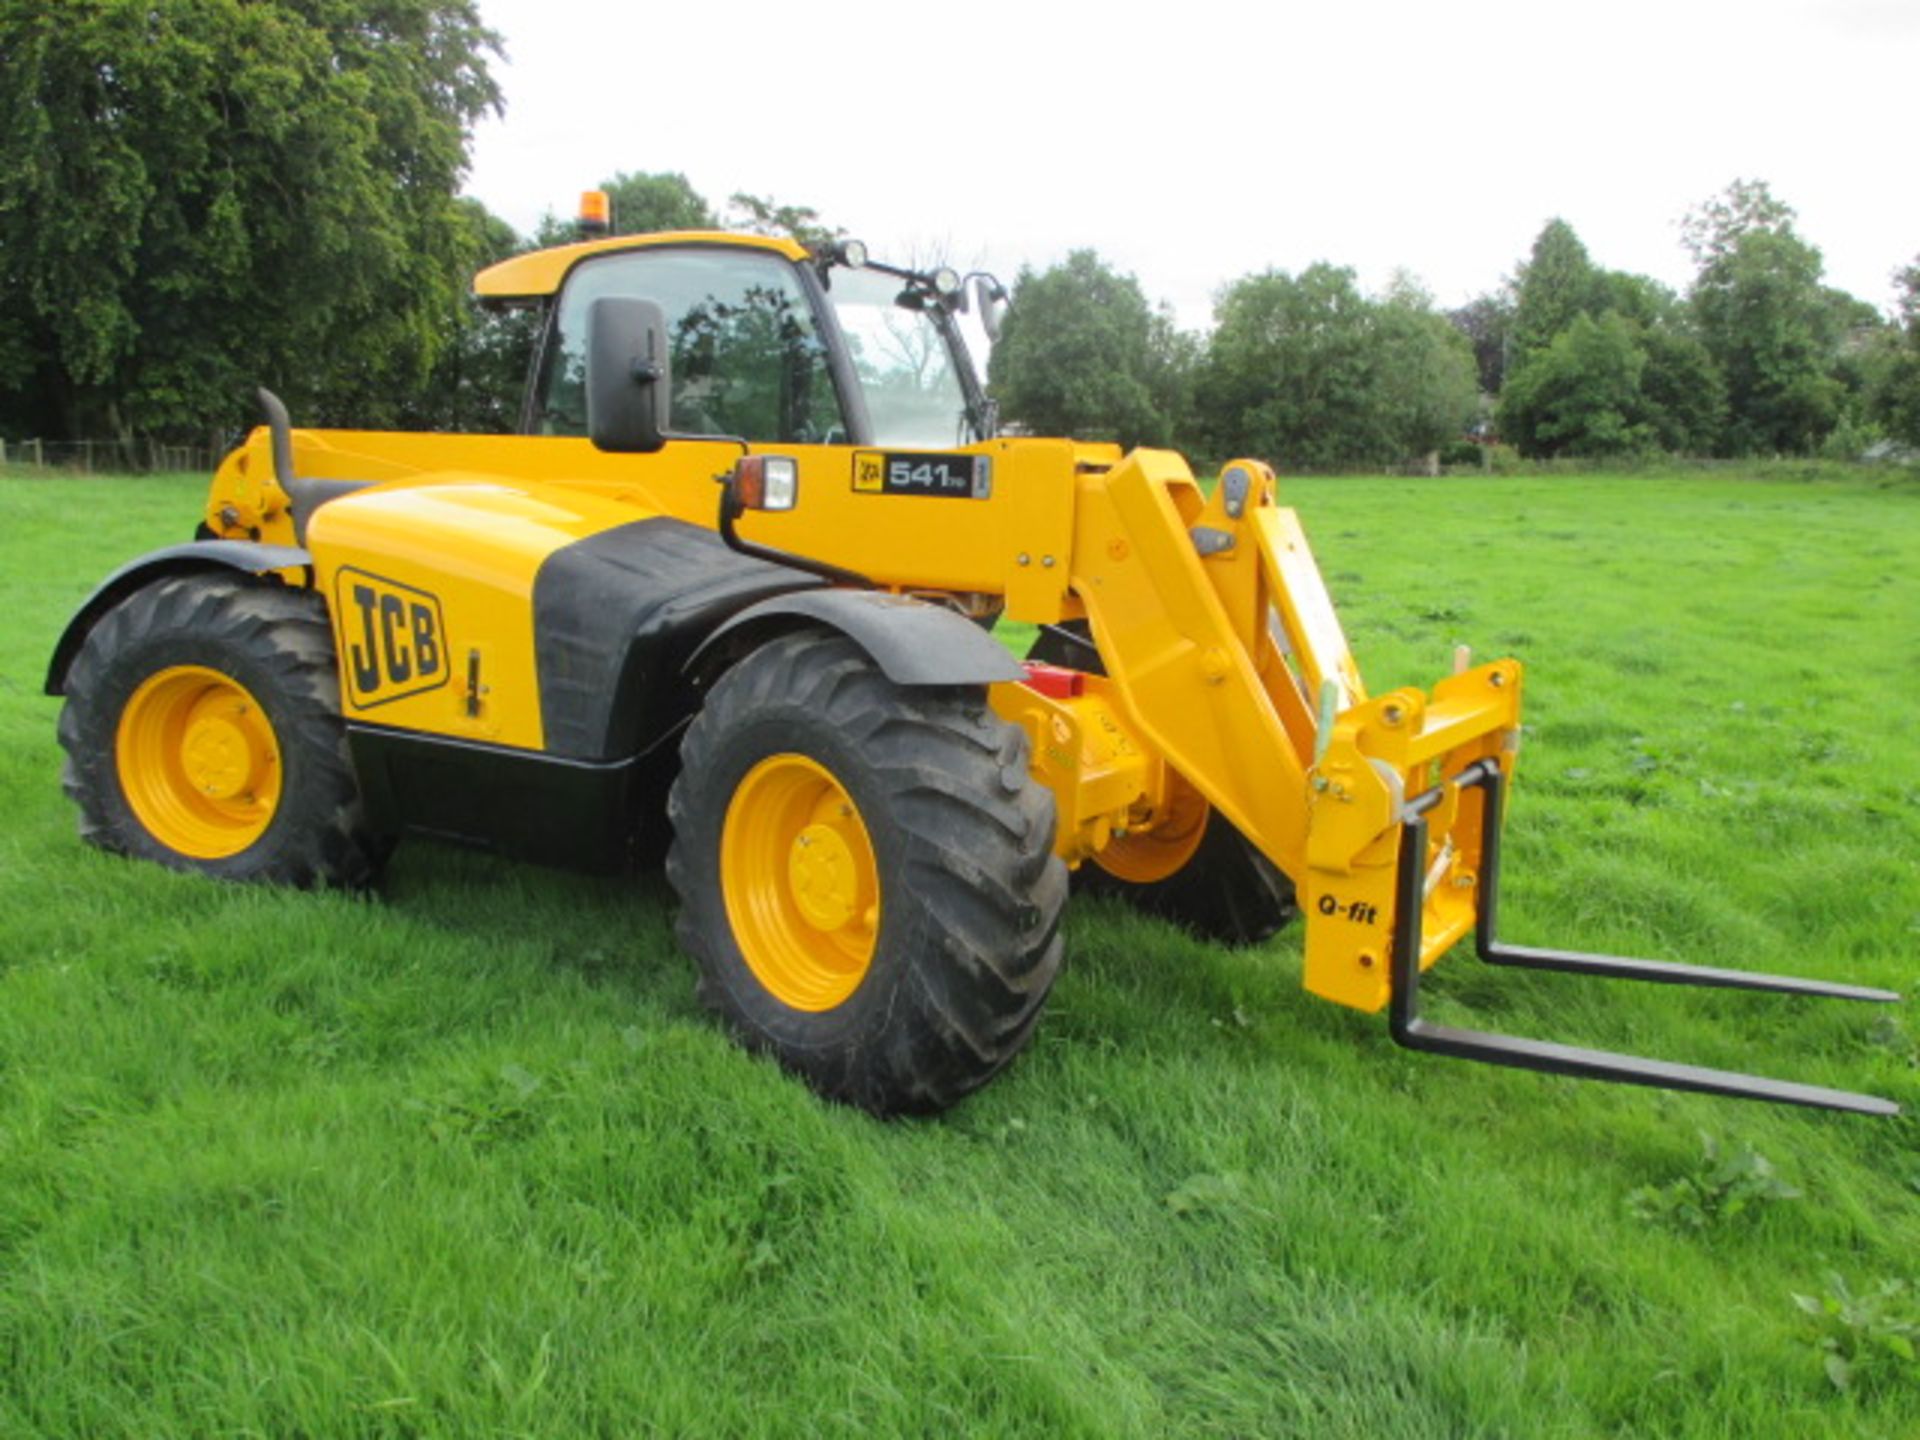 2006 JCB 541/70 Telehandler with large file of history. Council owned from new and dealer maintained